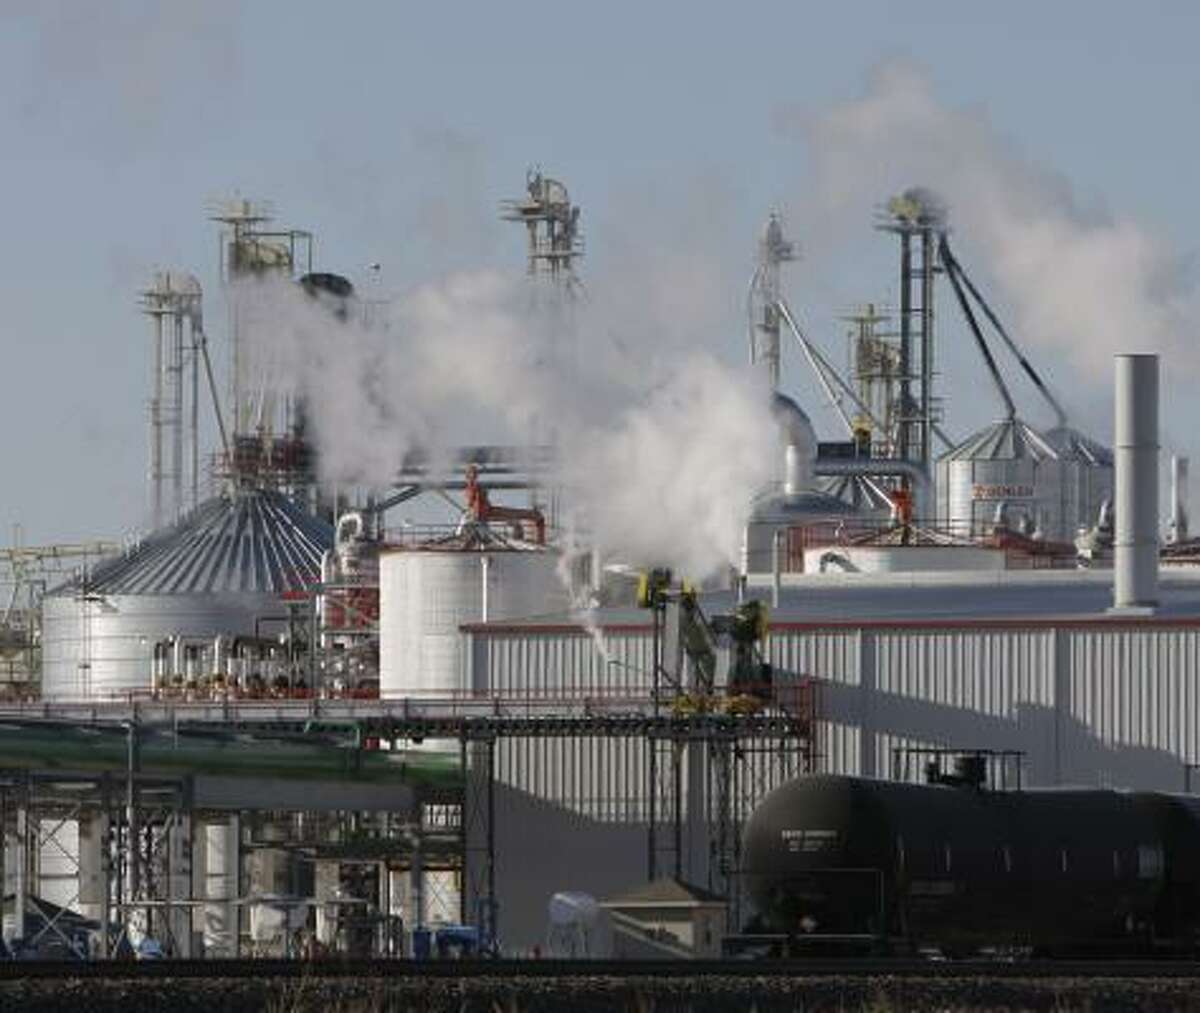 Tanker cars prepare to transport corn-based ethanol from the White Energy facility in Hereford.